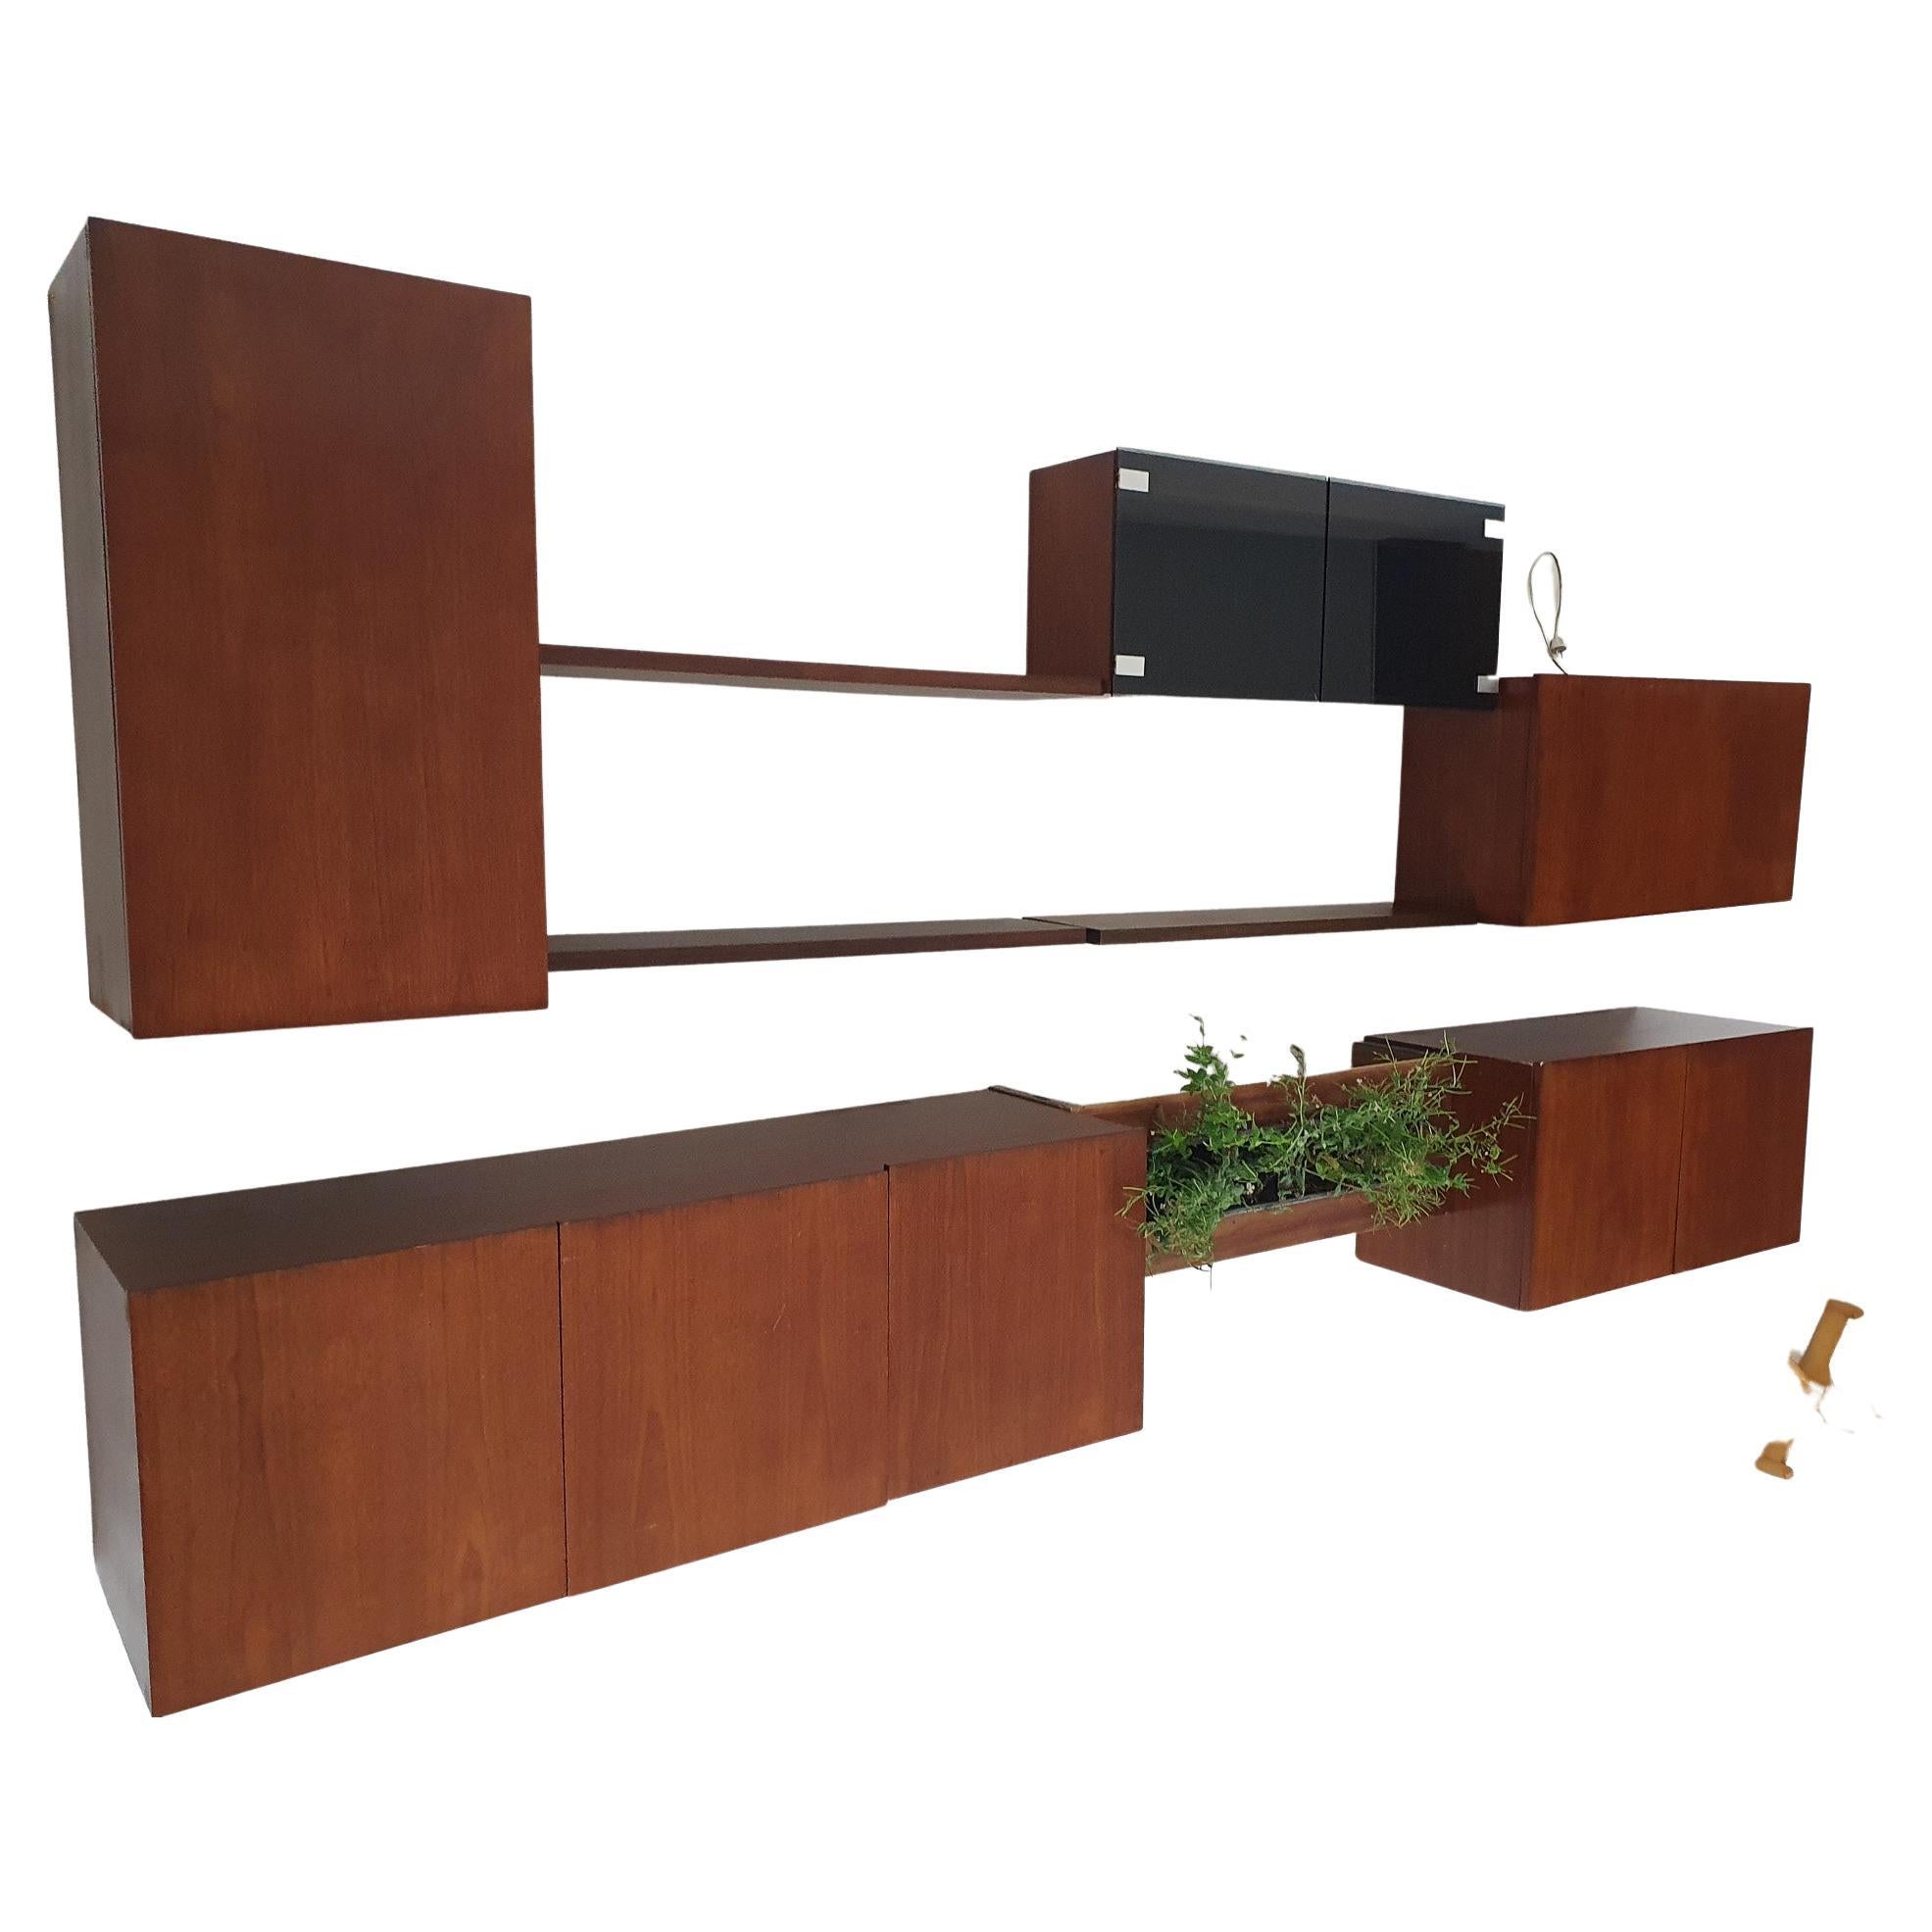 Floating wall unit by Banz Bord, The Netherlands, 1970's For Sale